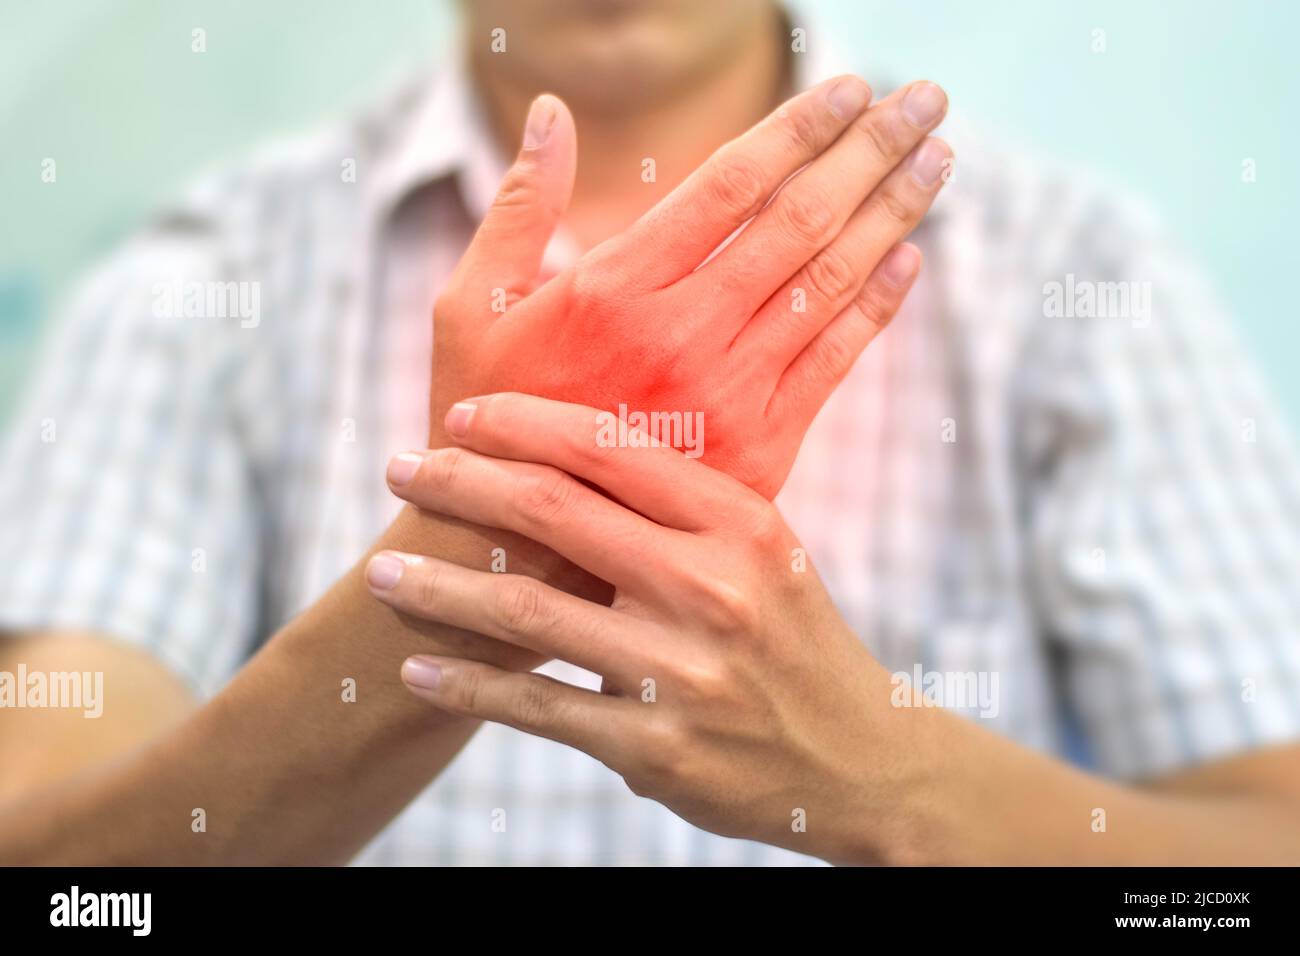 Hand joints inflammation. Concept and idea of rheumatic arthritis, gout, joint swelling or arthralgia. Stock Photo